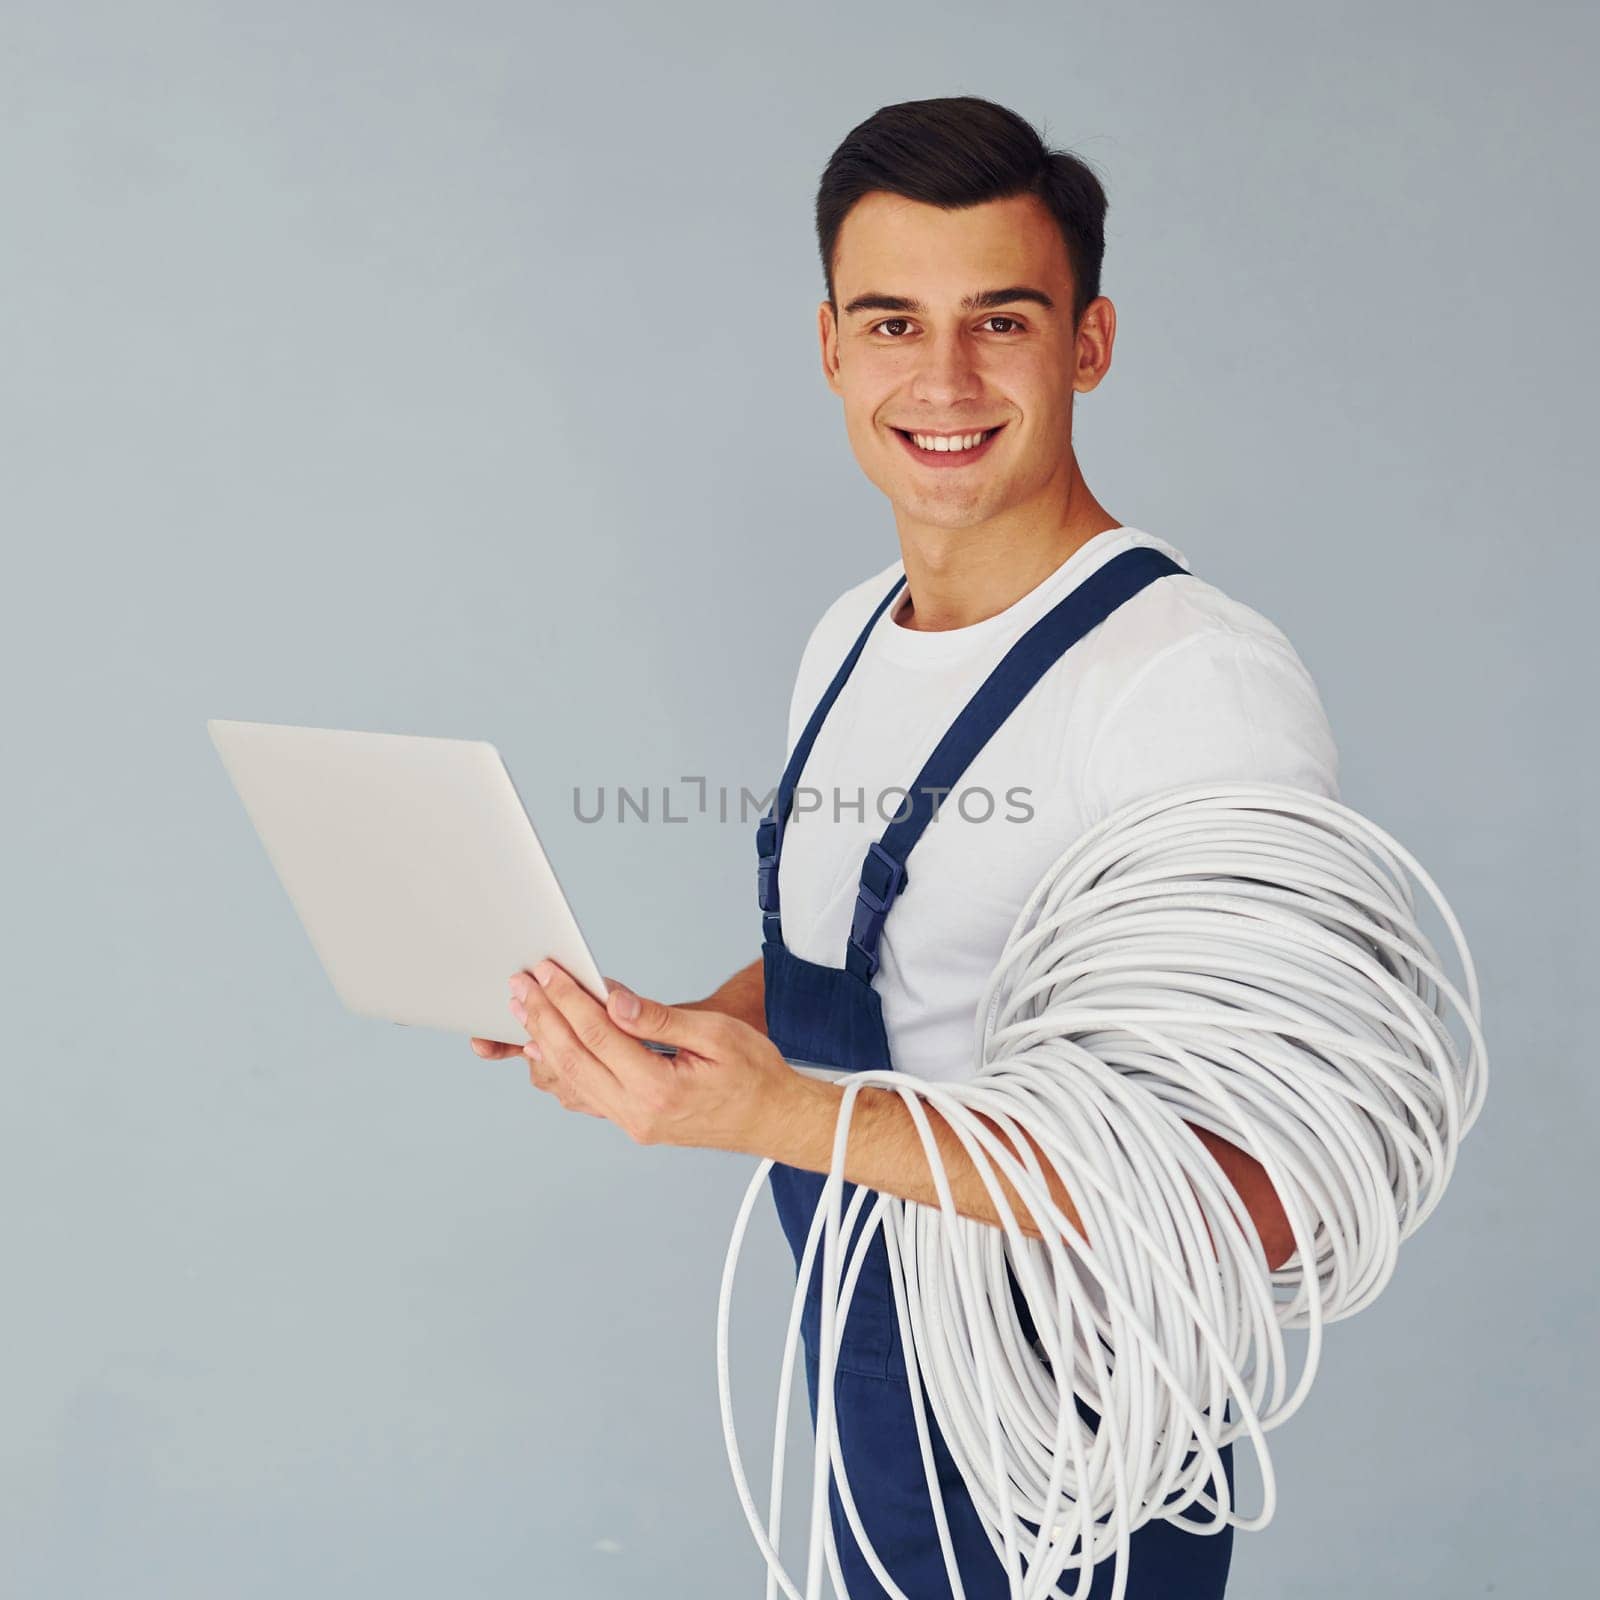 Uses laptop. Male worker in blue uniform standing inside of studio against white background.